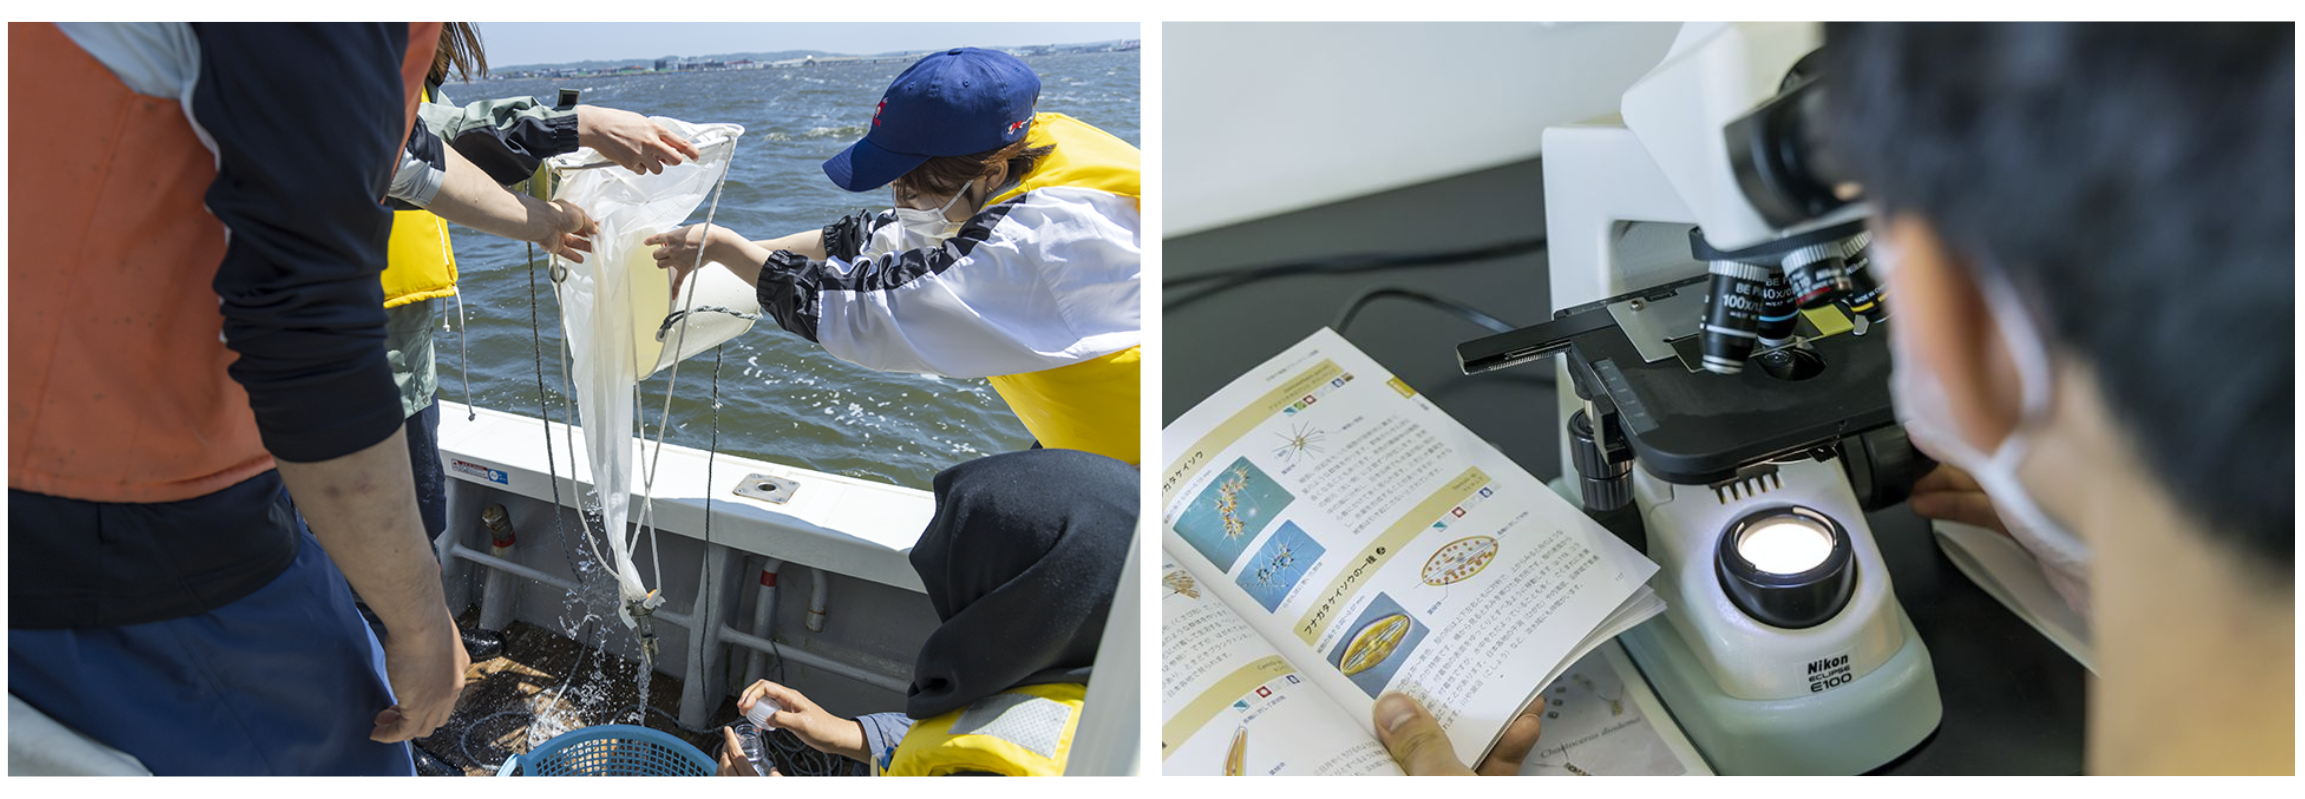 Left: A group of students on a ship, taking seawater samples. Right: a student using a microscope and holding a book.